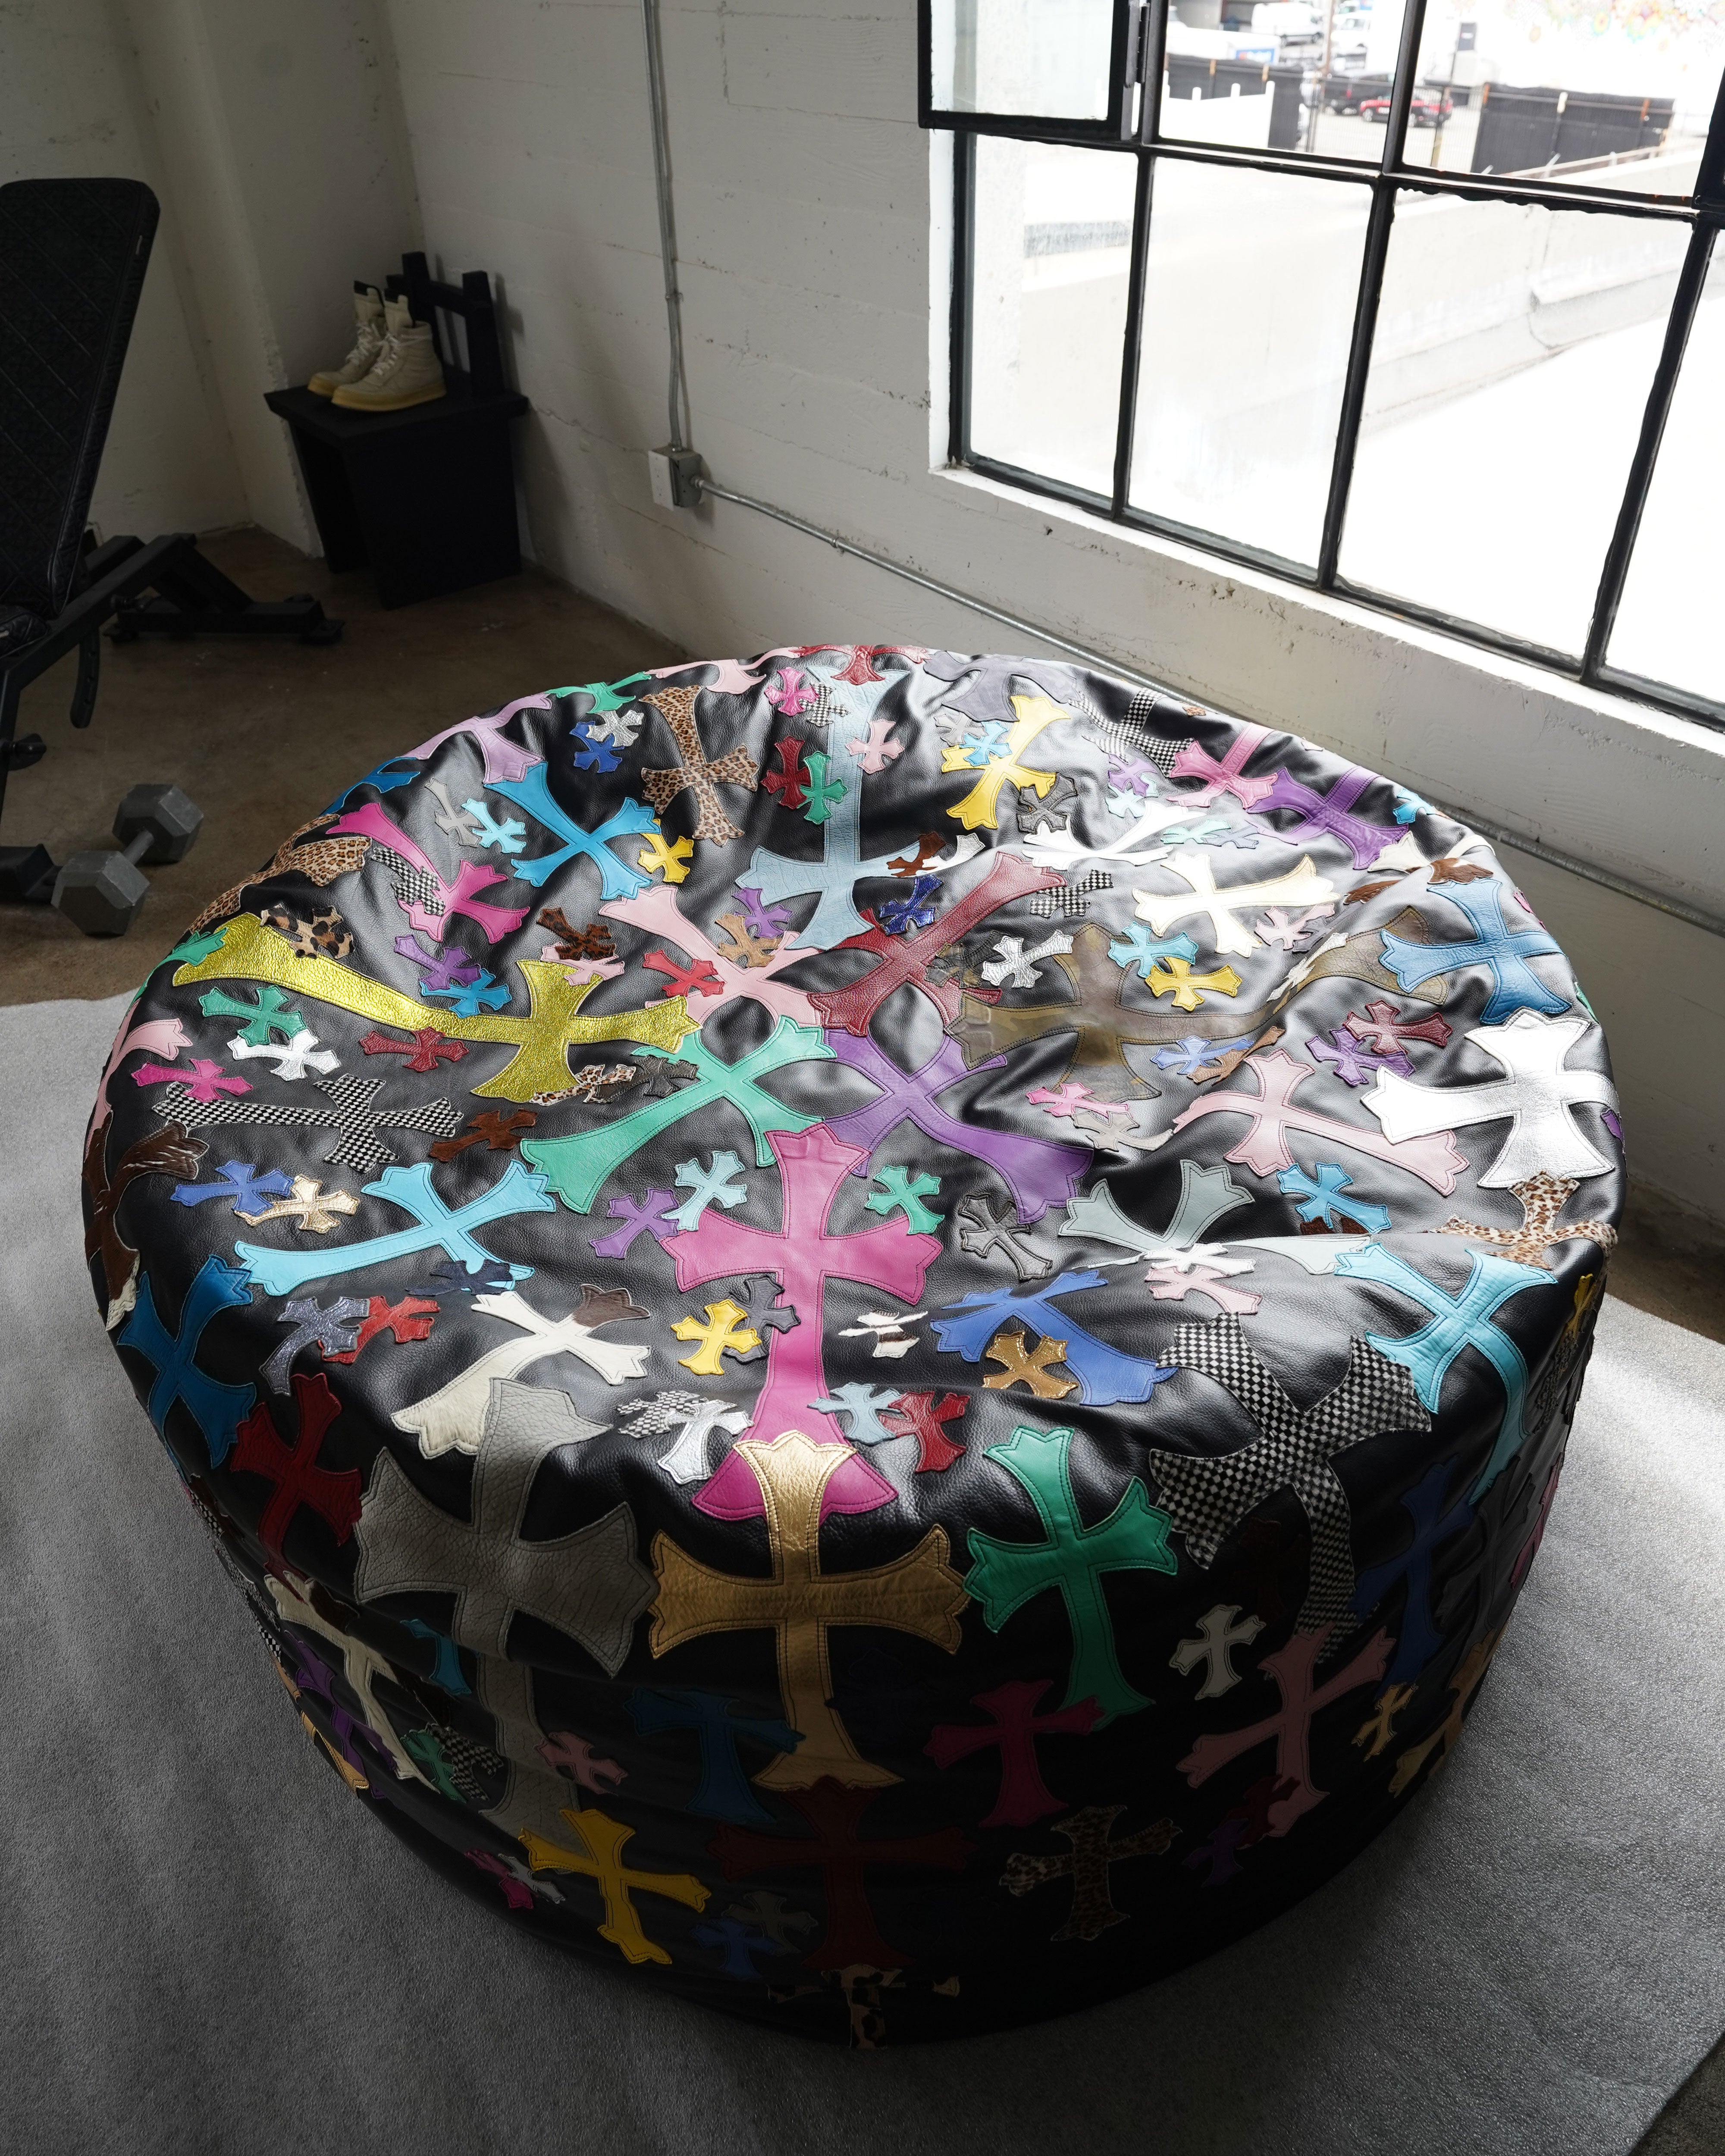 Chrome Hearts Extra Large Leather Multicolor Cross Patch Beanbag Chair